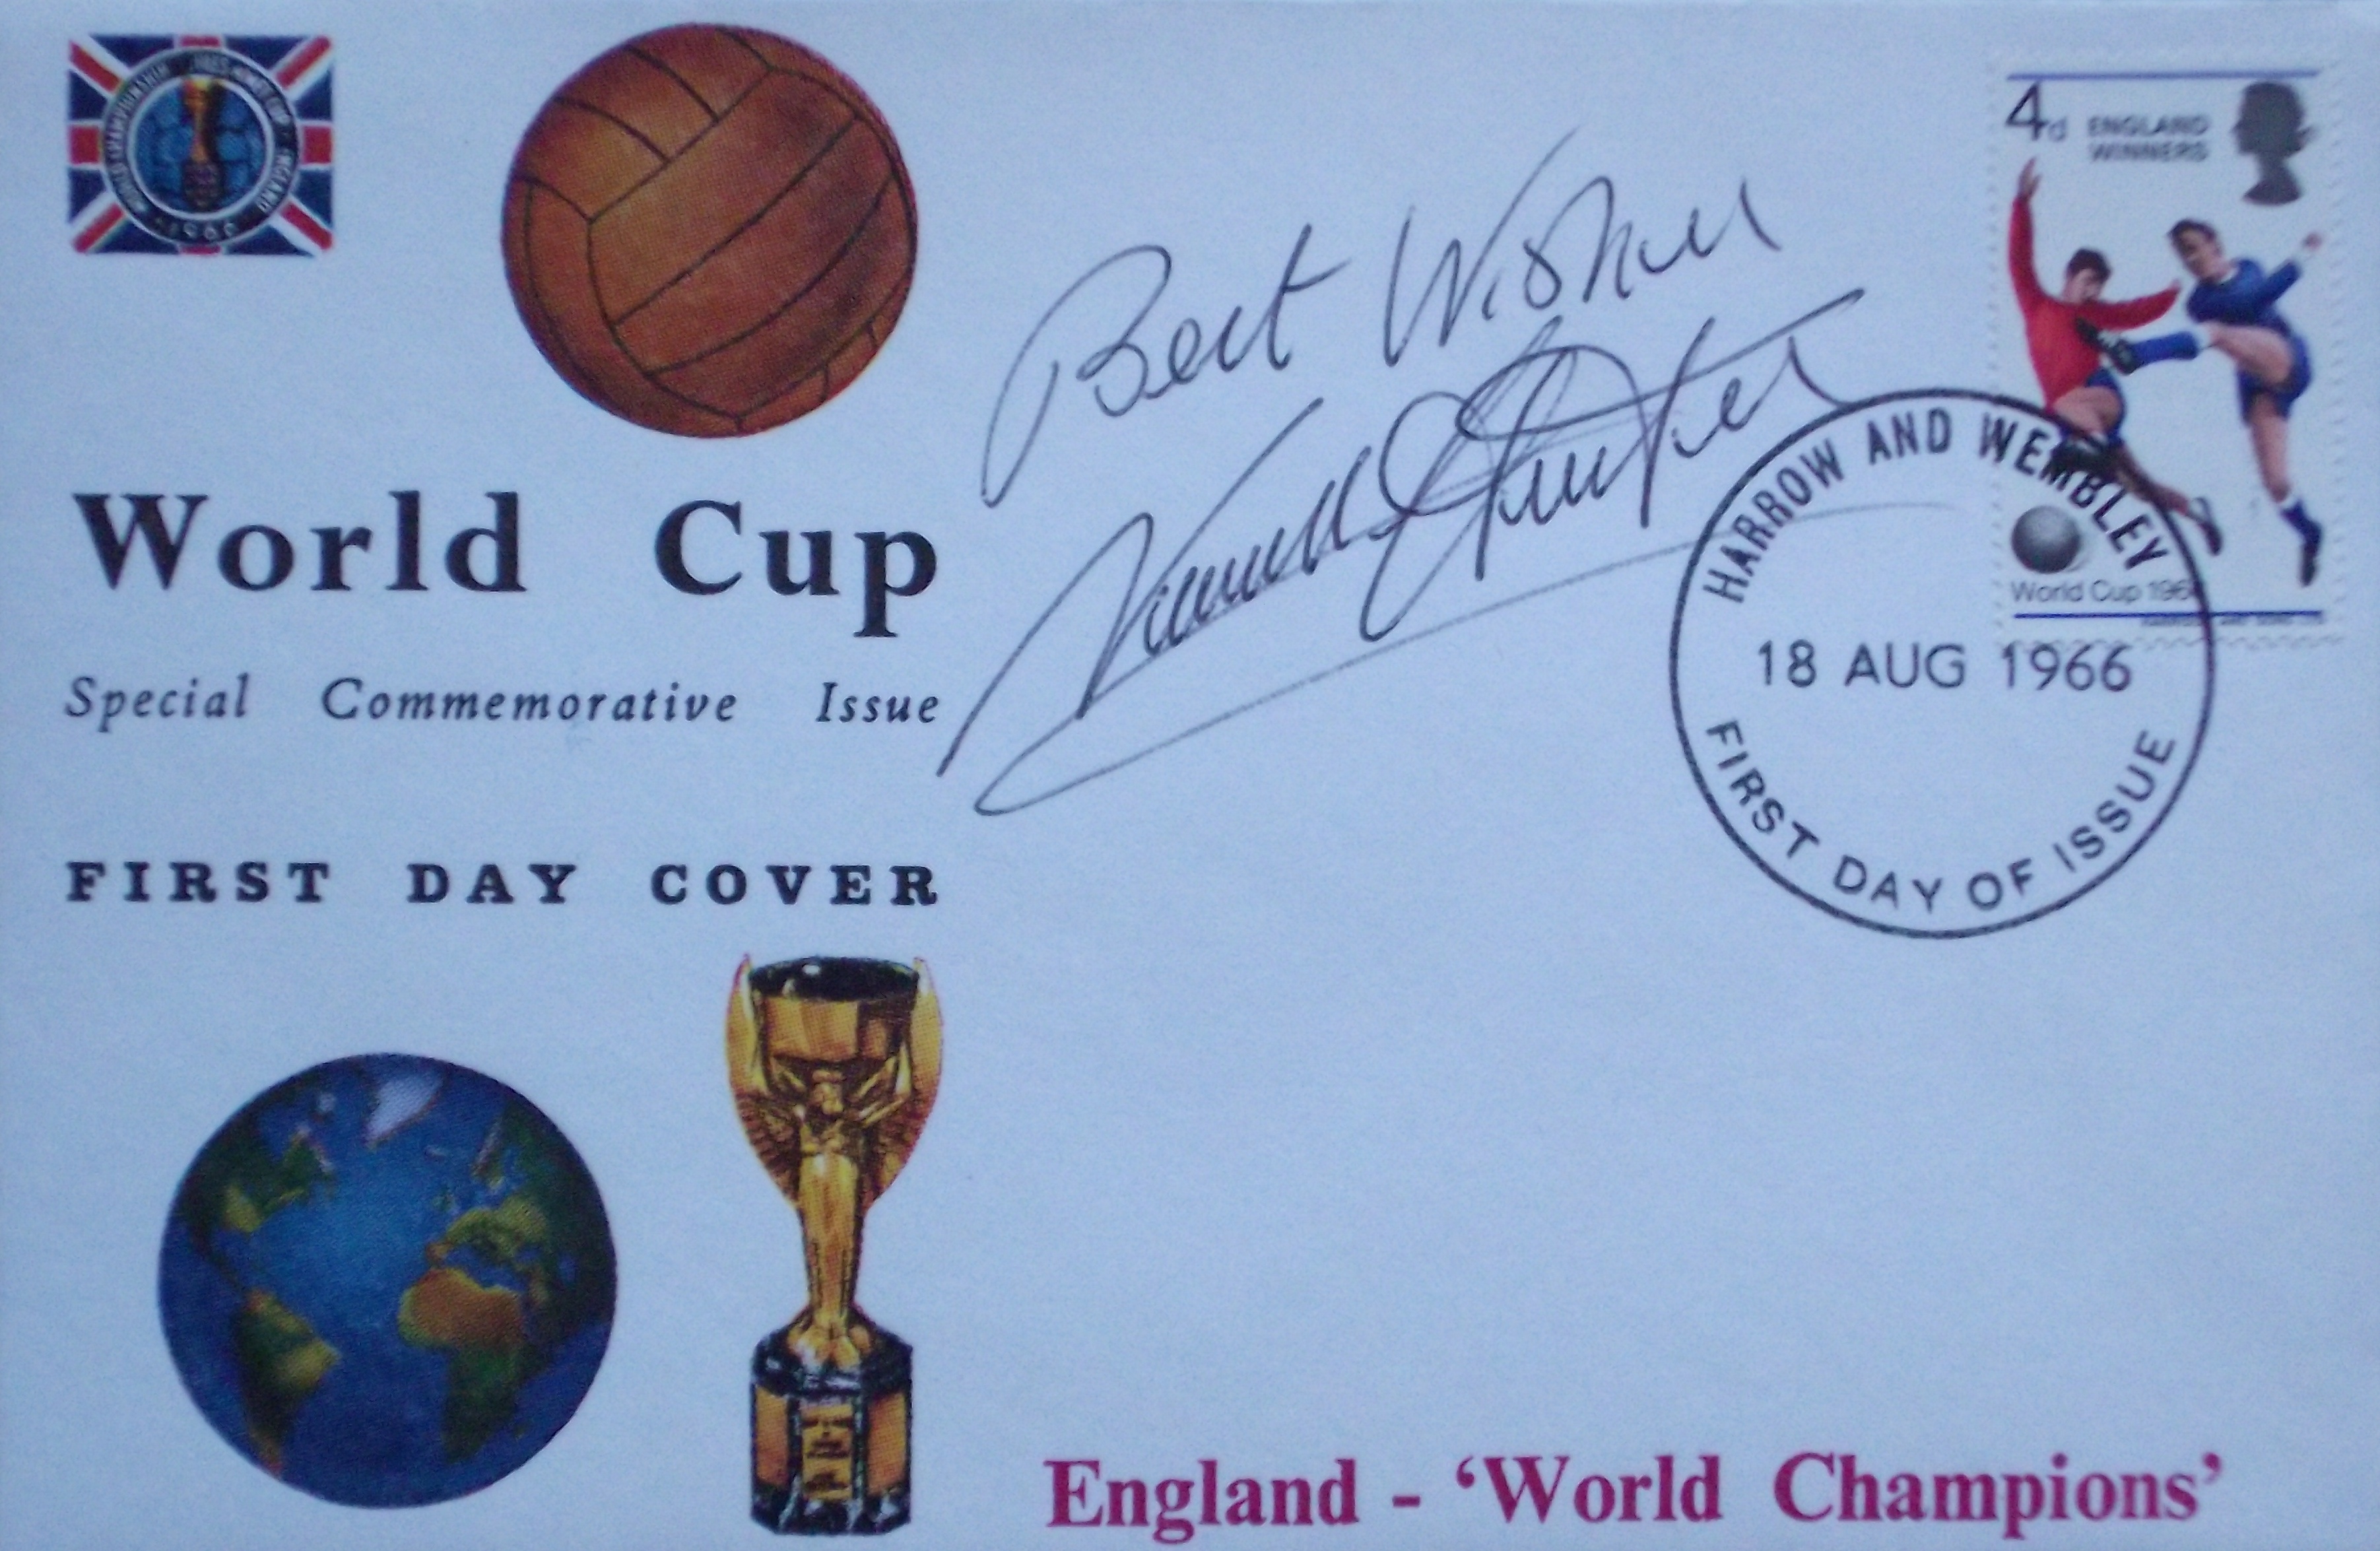 ENGLAND 1966 WORLD CUP RARE REMBRANDT POSTAL COVER AUTOGRAPHED BY NORMAN HUNTER